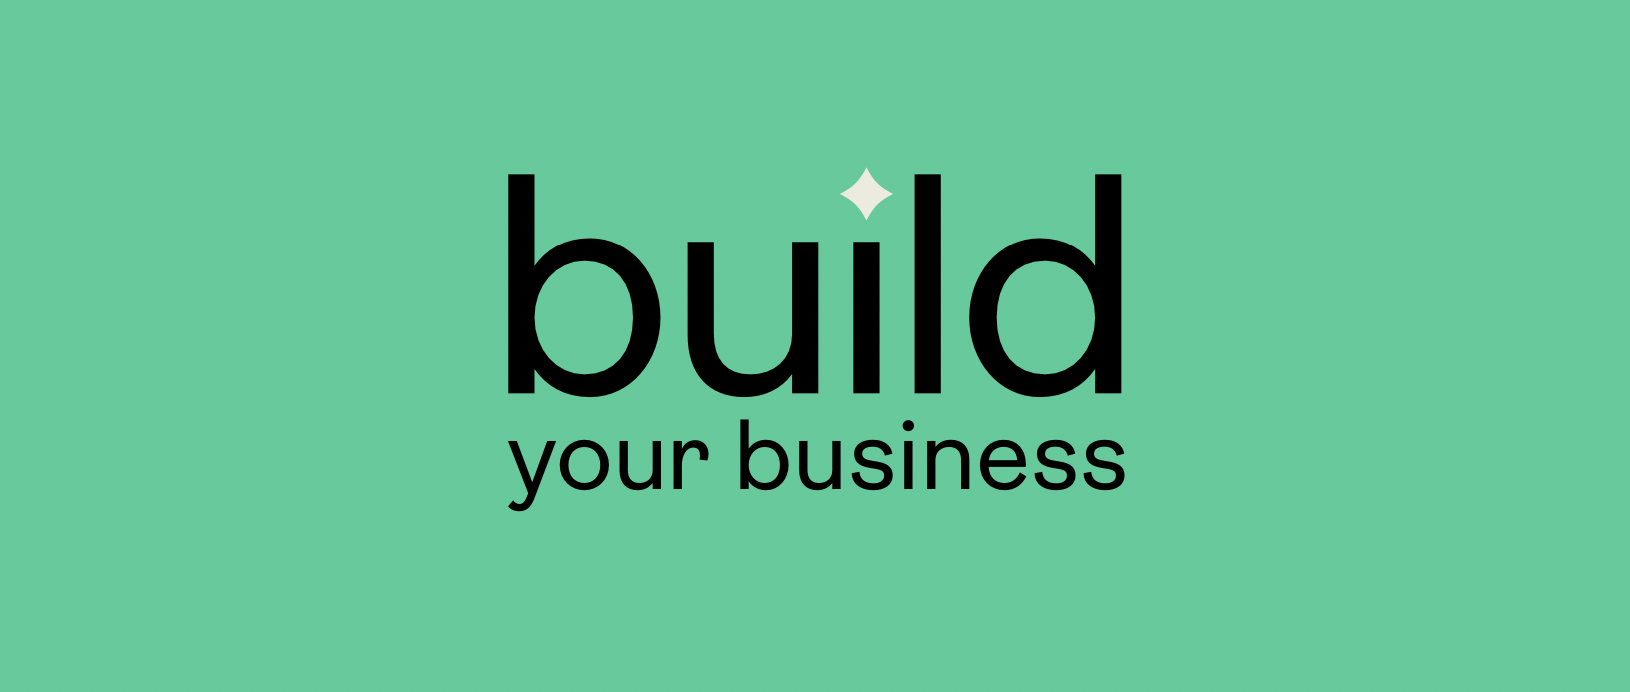 Build Your business